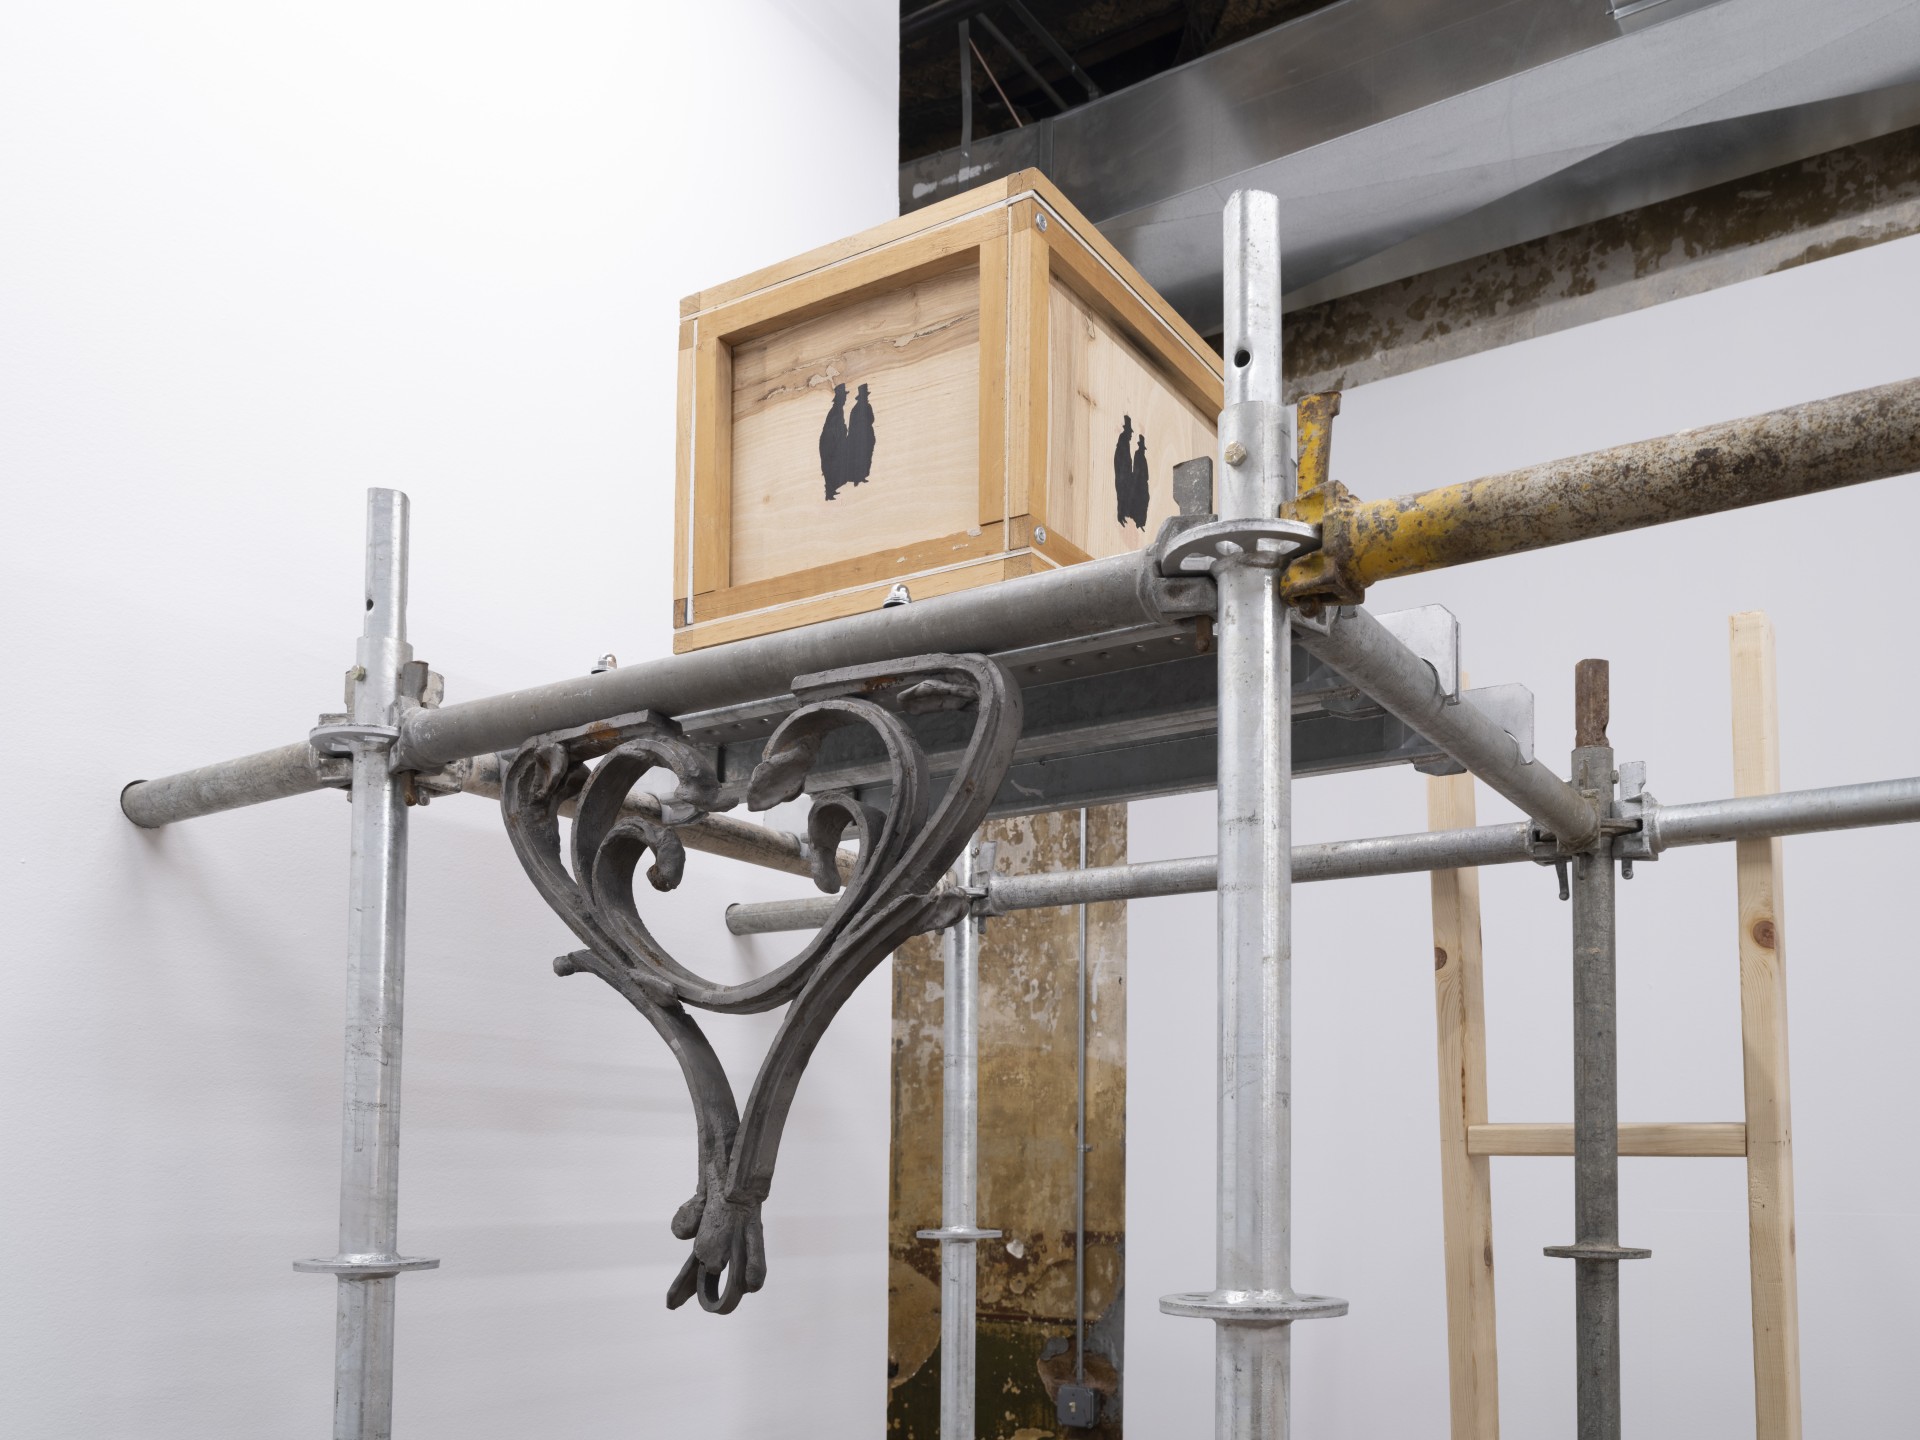 Anna Campbell, *Ladies of Llangollen crate for JHC*, 2012-2022, pine, plywood, hardware. Photo: Daniel Kukla.